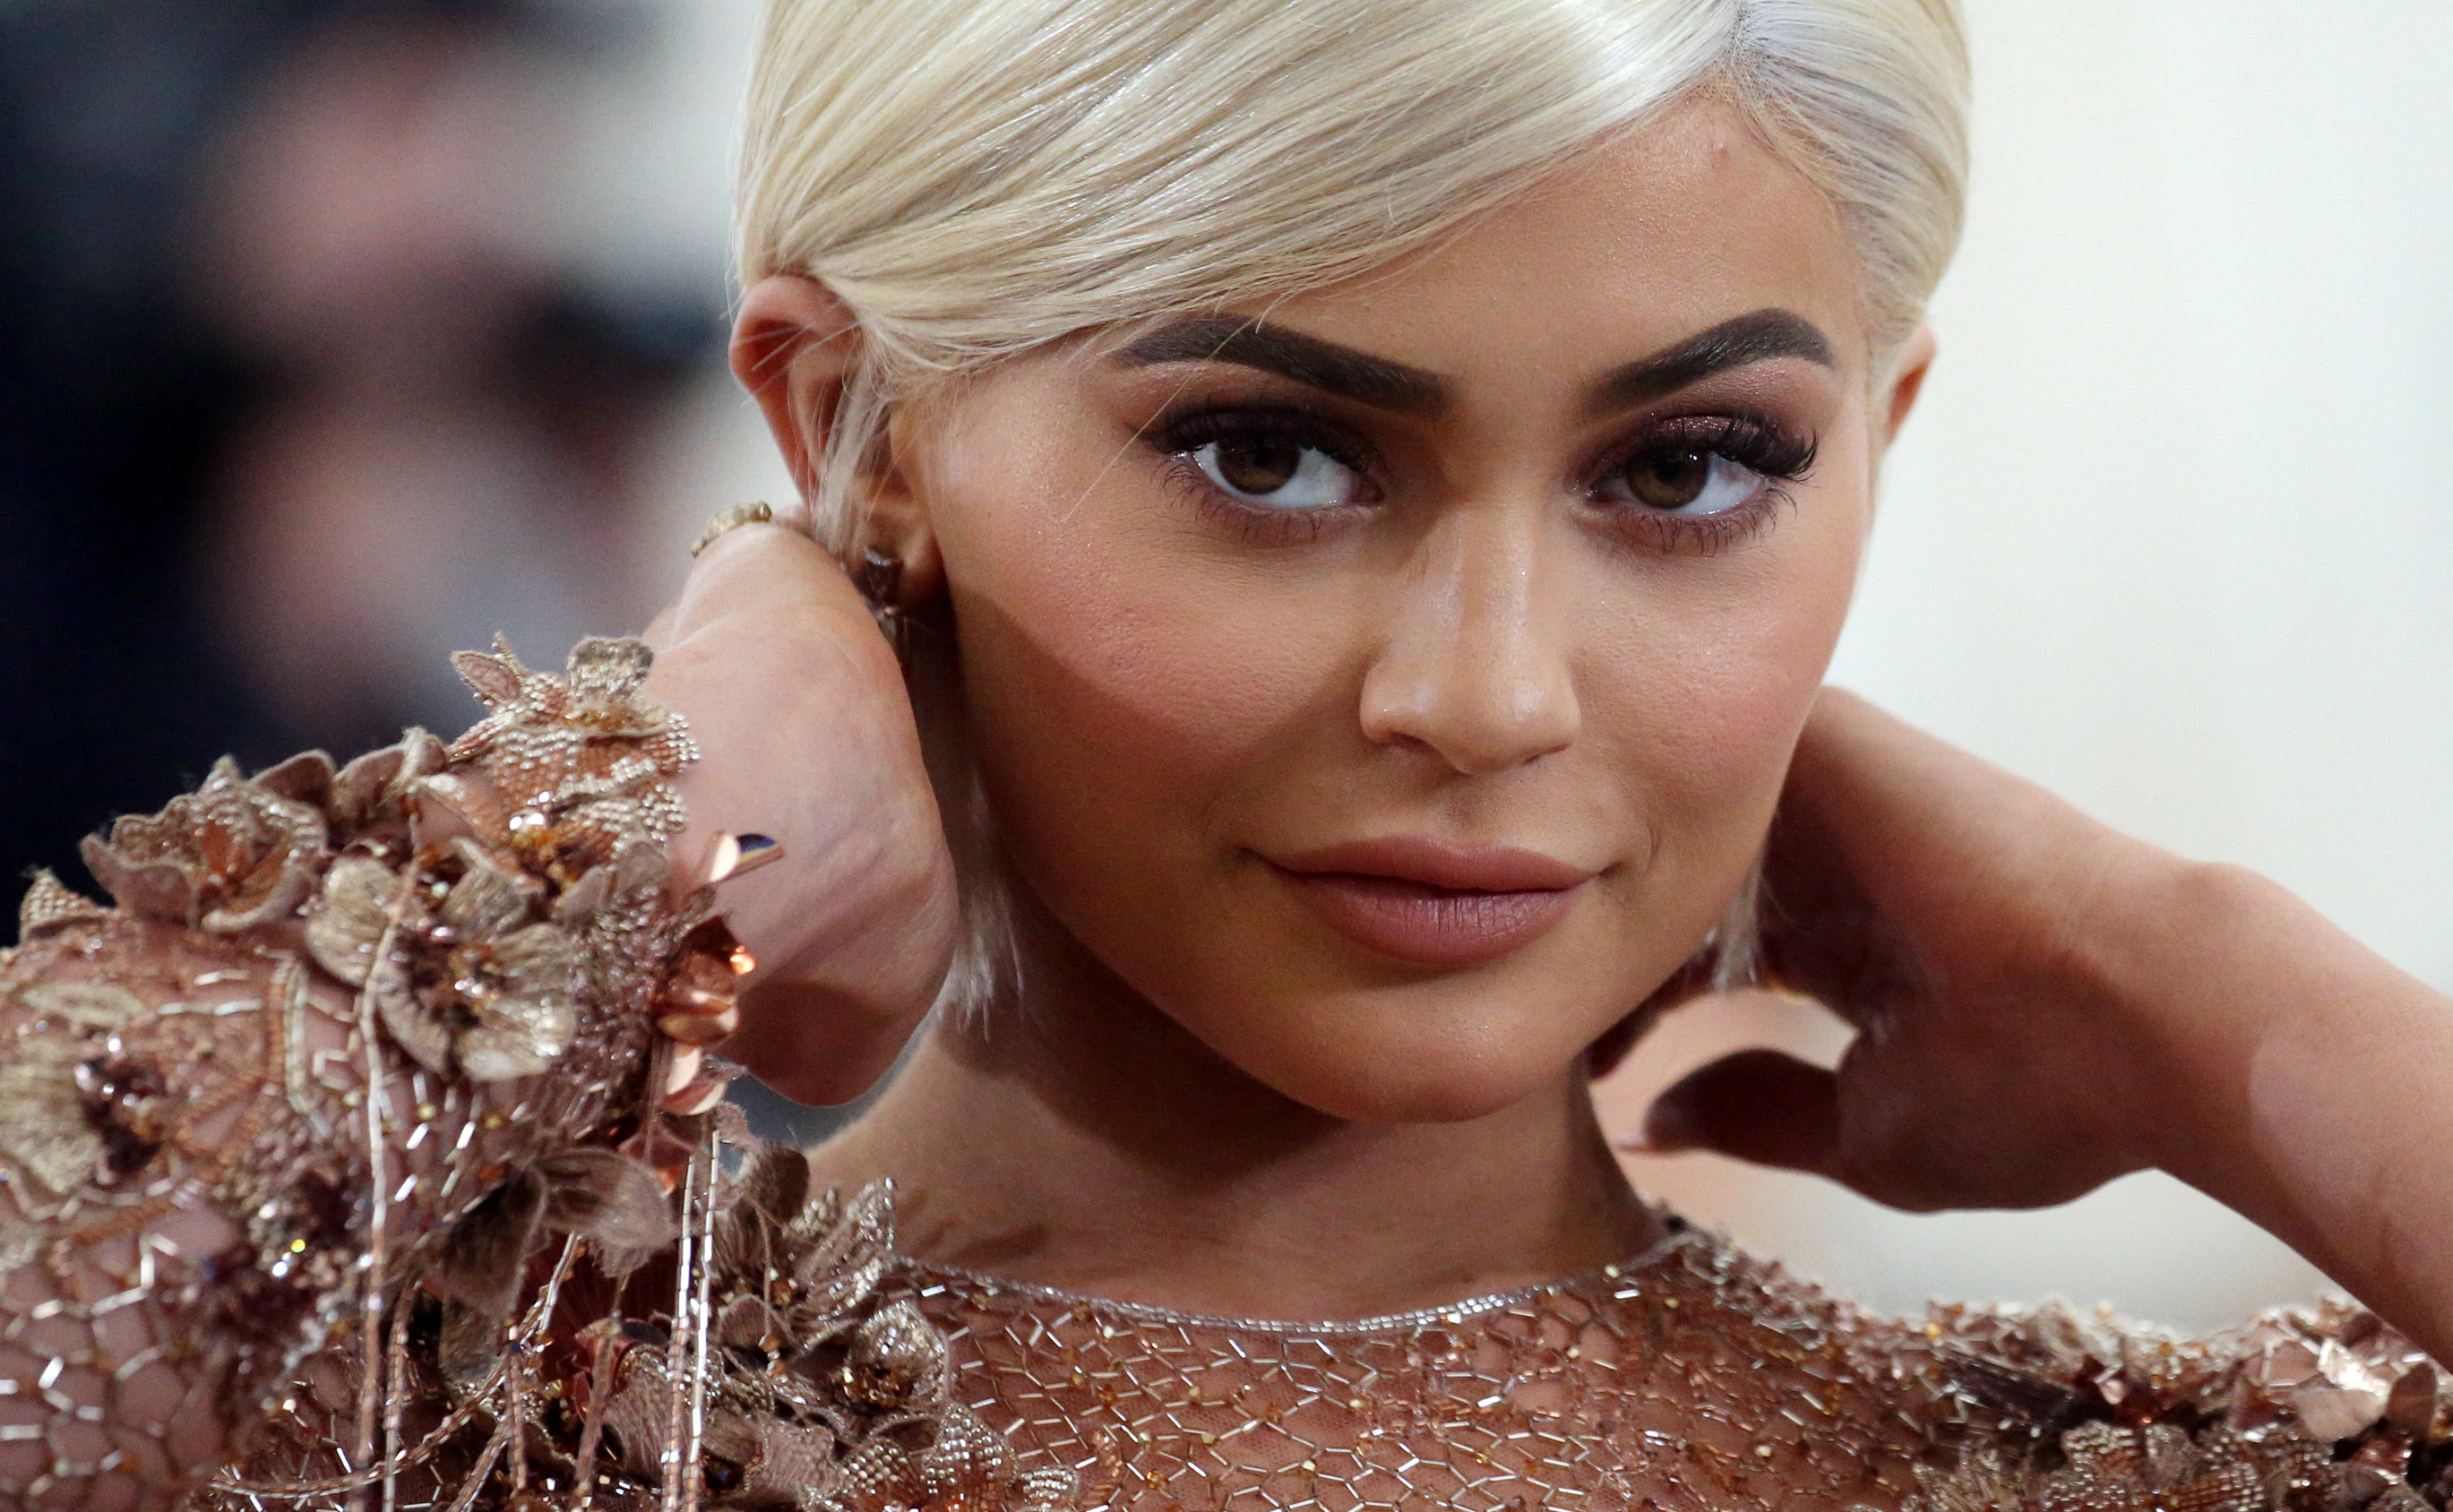 Kylie Jenner first grabbed the spotlight as part of the Keeping Up with the Kardashians reality...